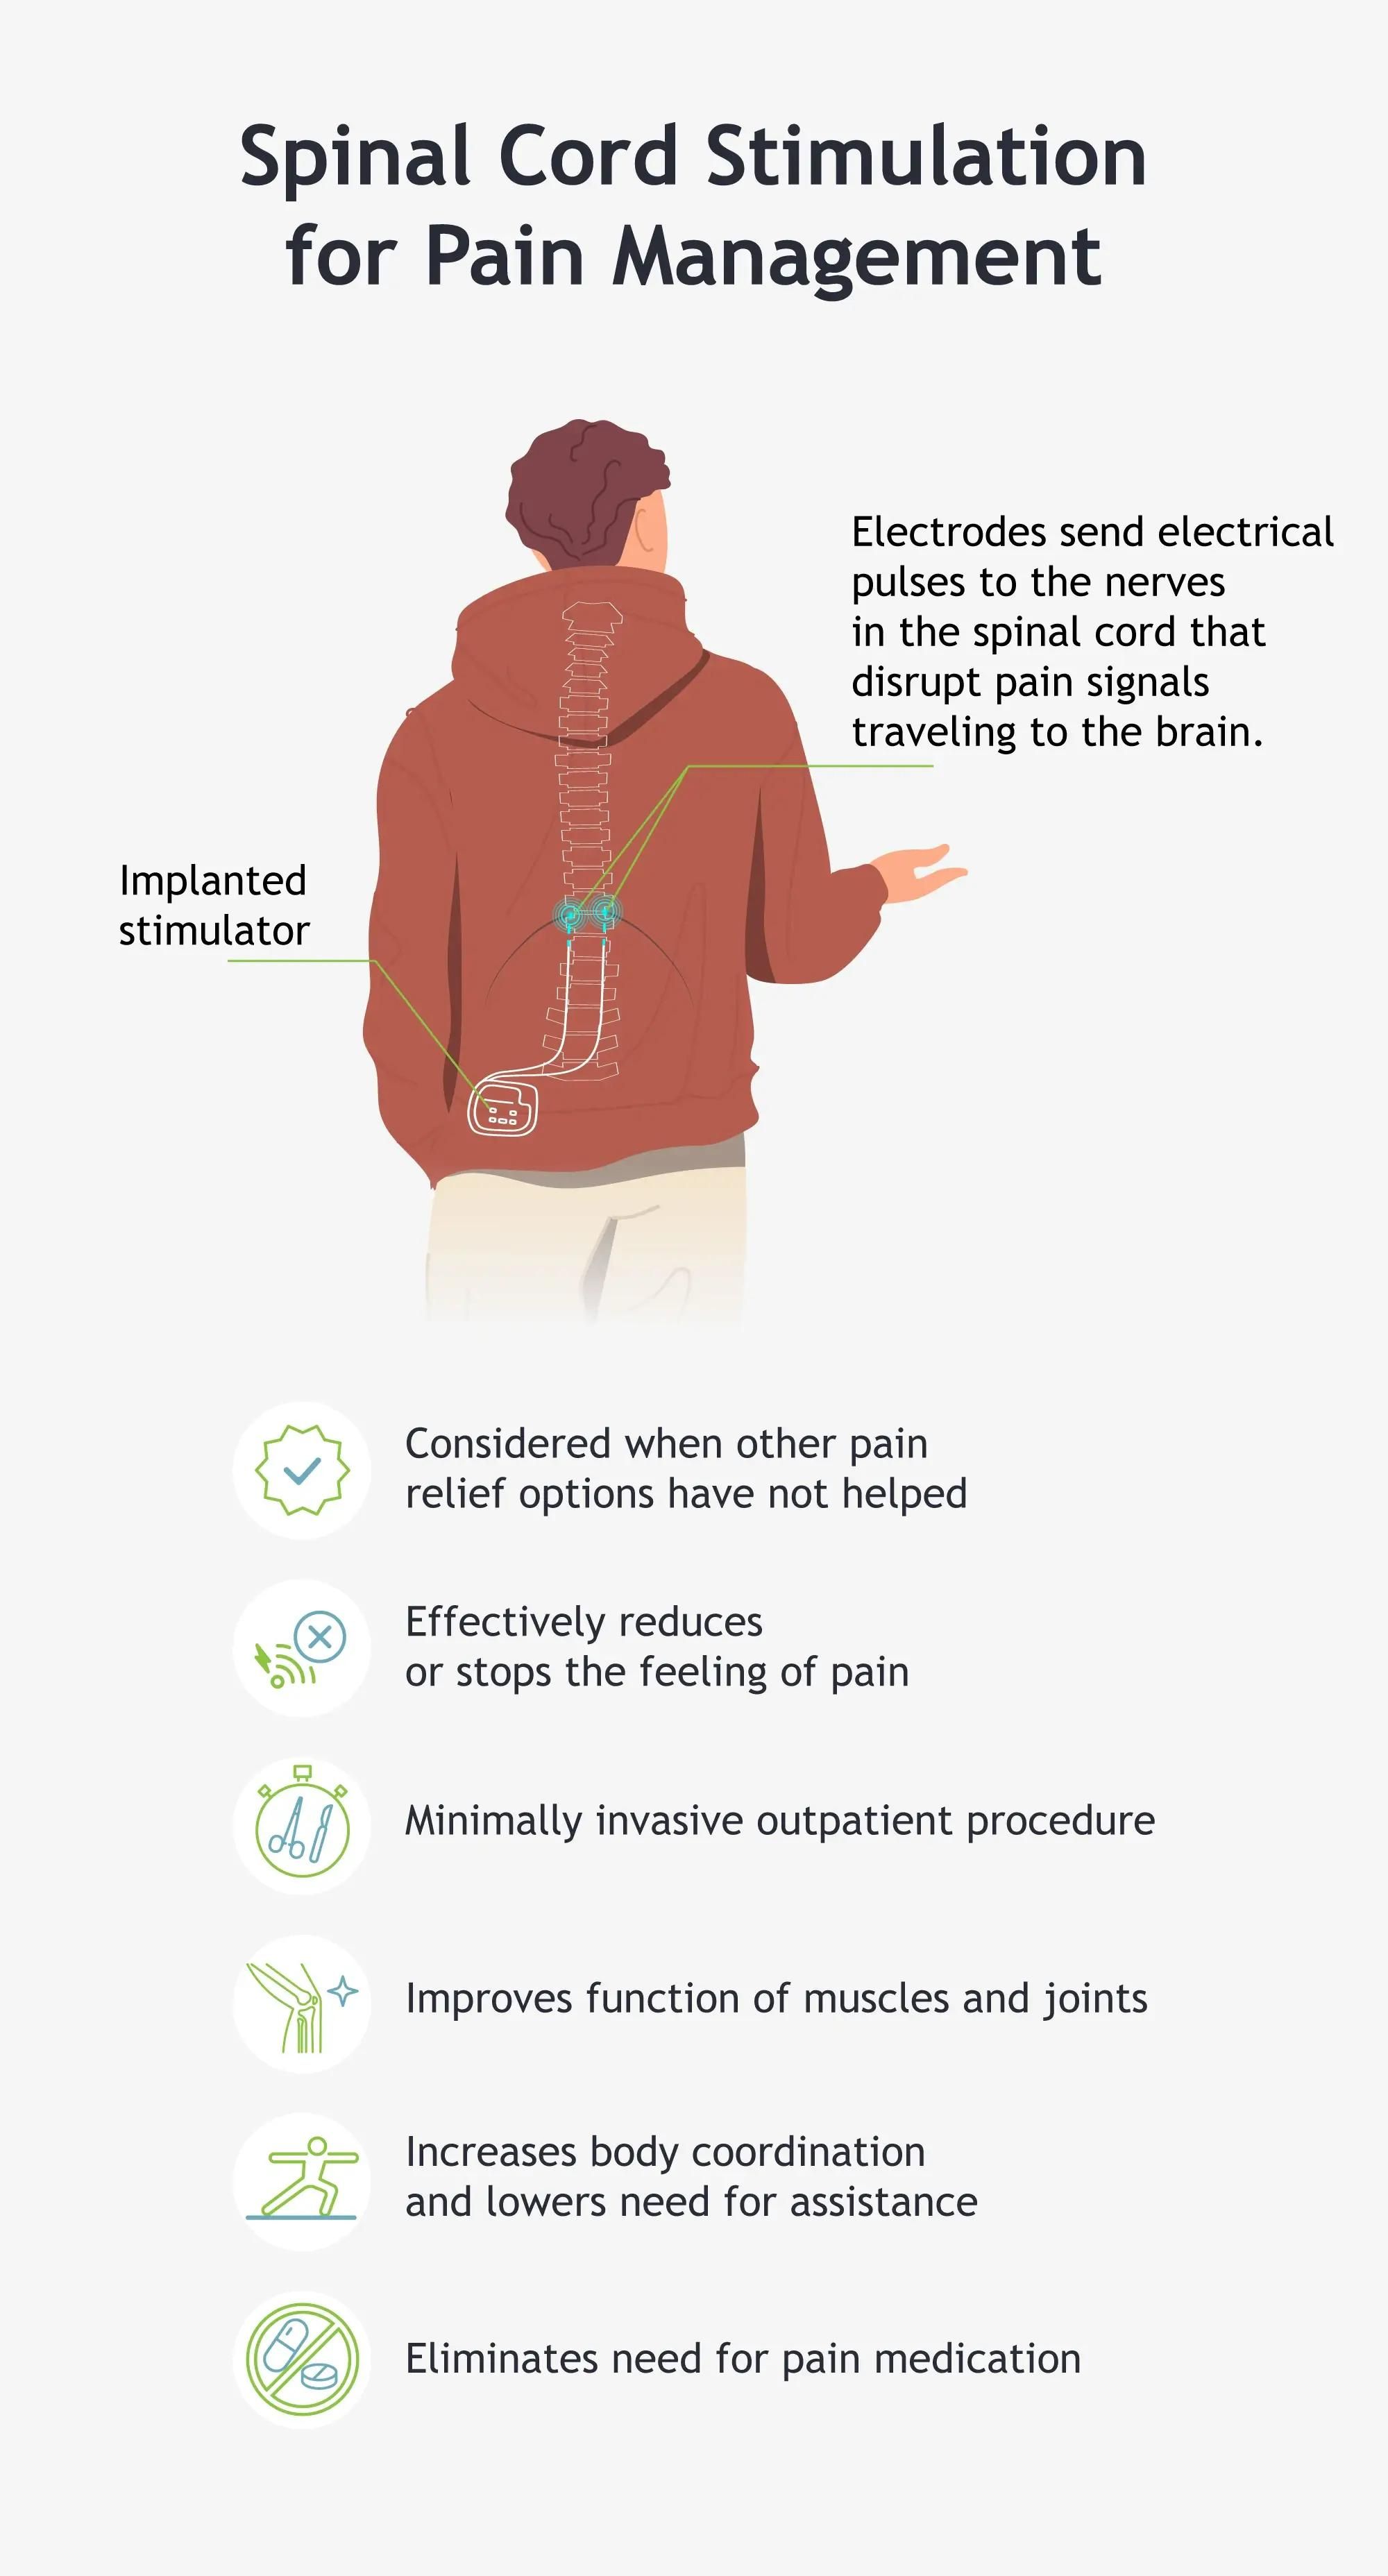 An infographic describing the spinal cord stimulation process and benefits.